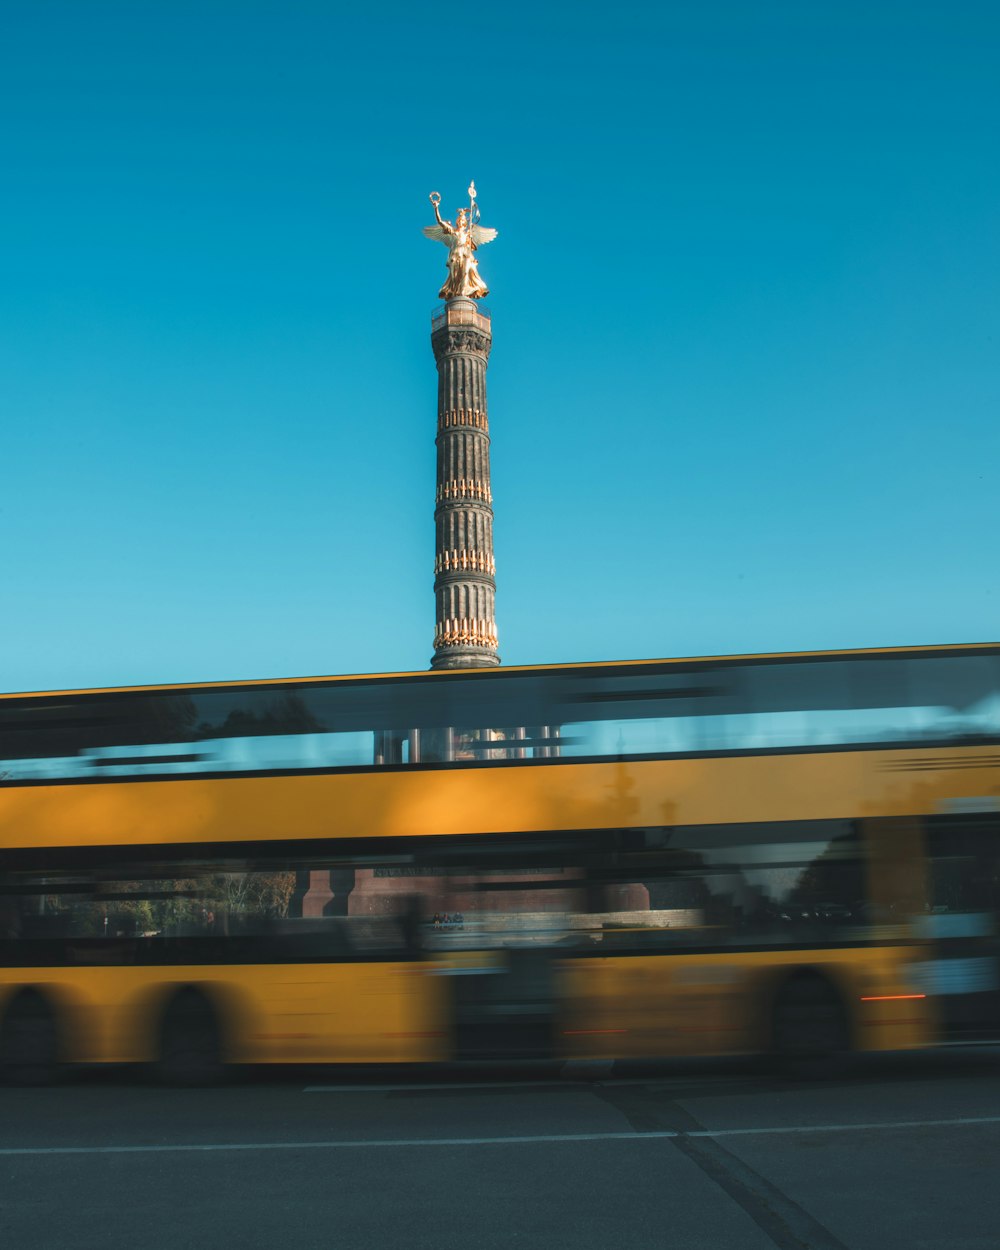 a bus driving past a tall tower